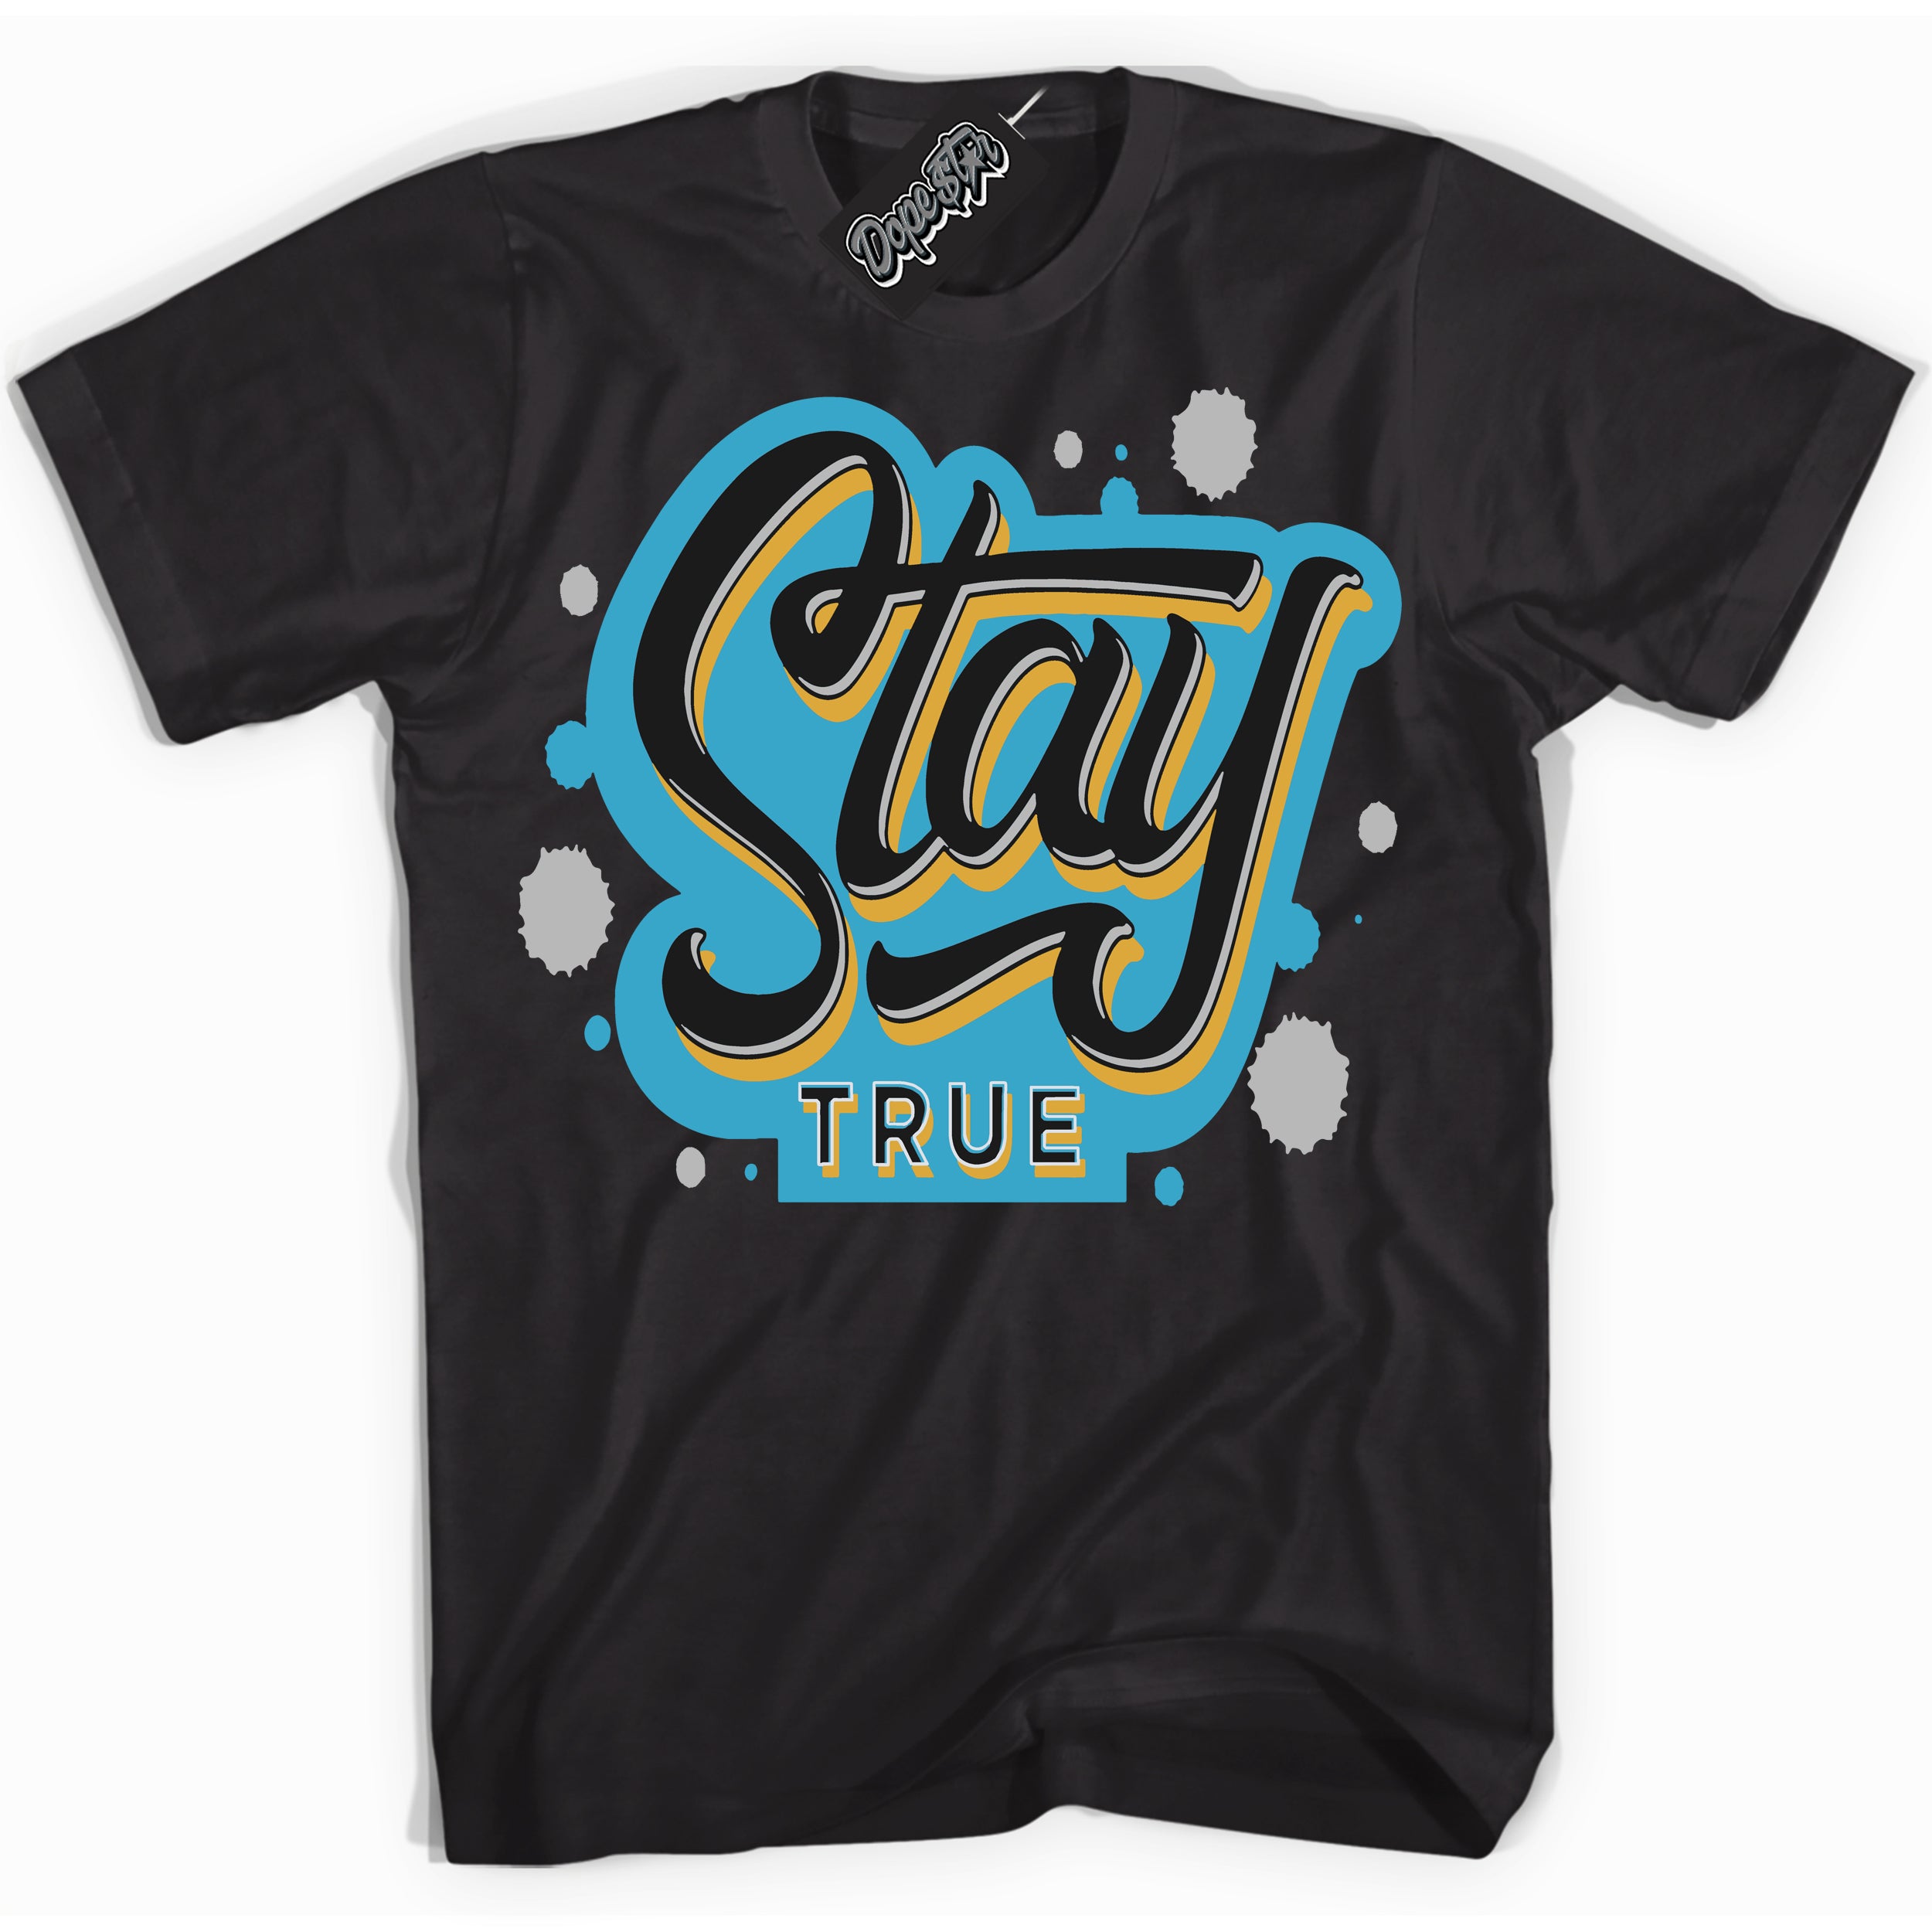 Cool Black Shirt with “ Stay True” design that perfectly matches Aqua 5s Sneakers.